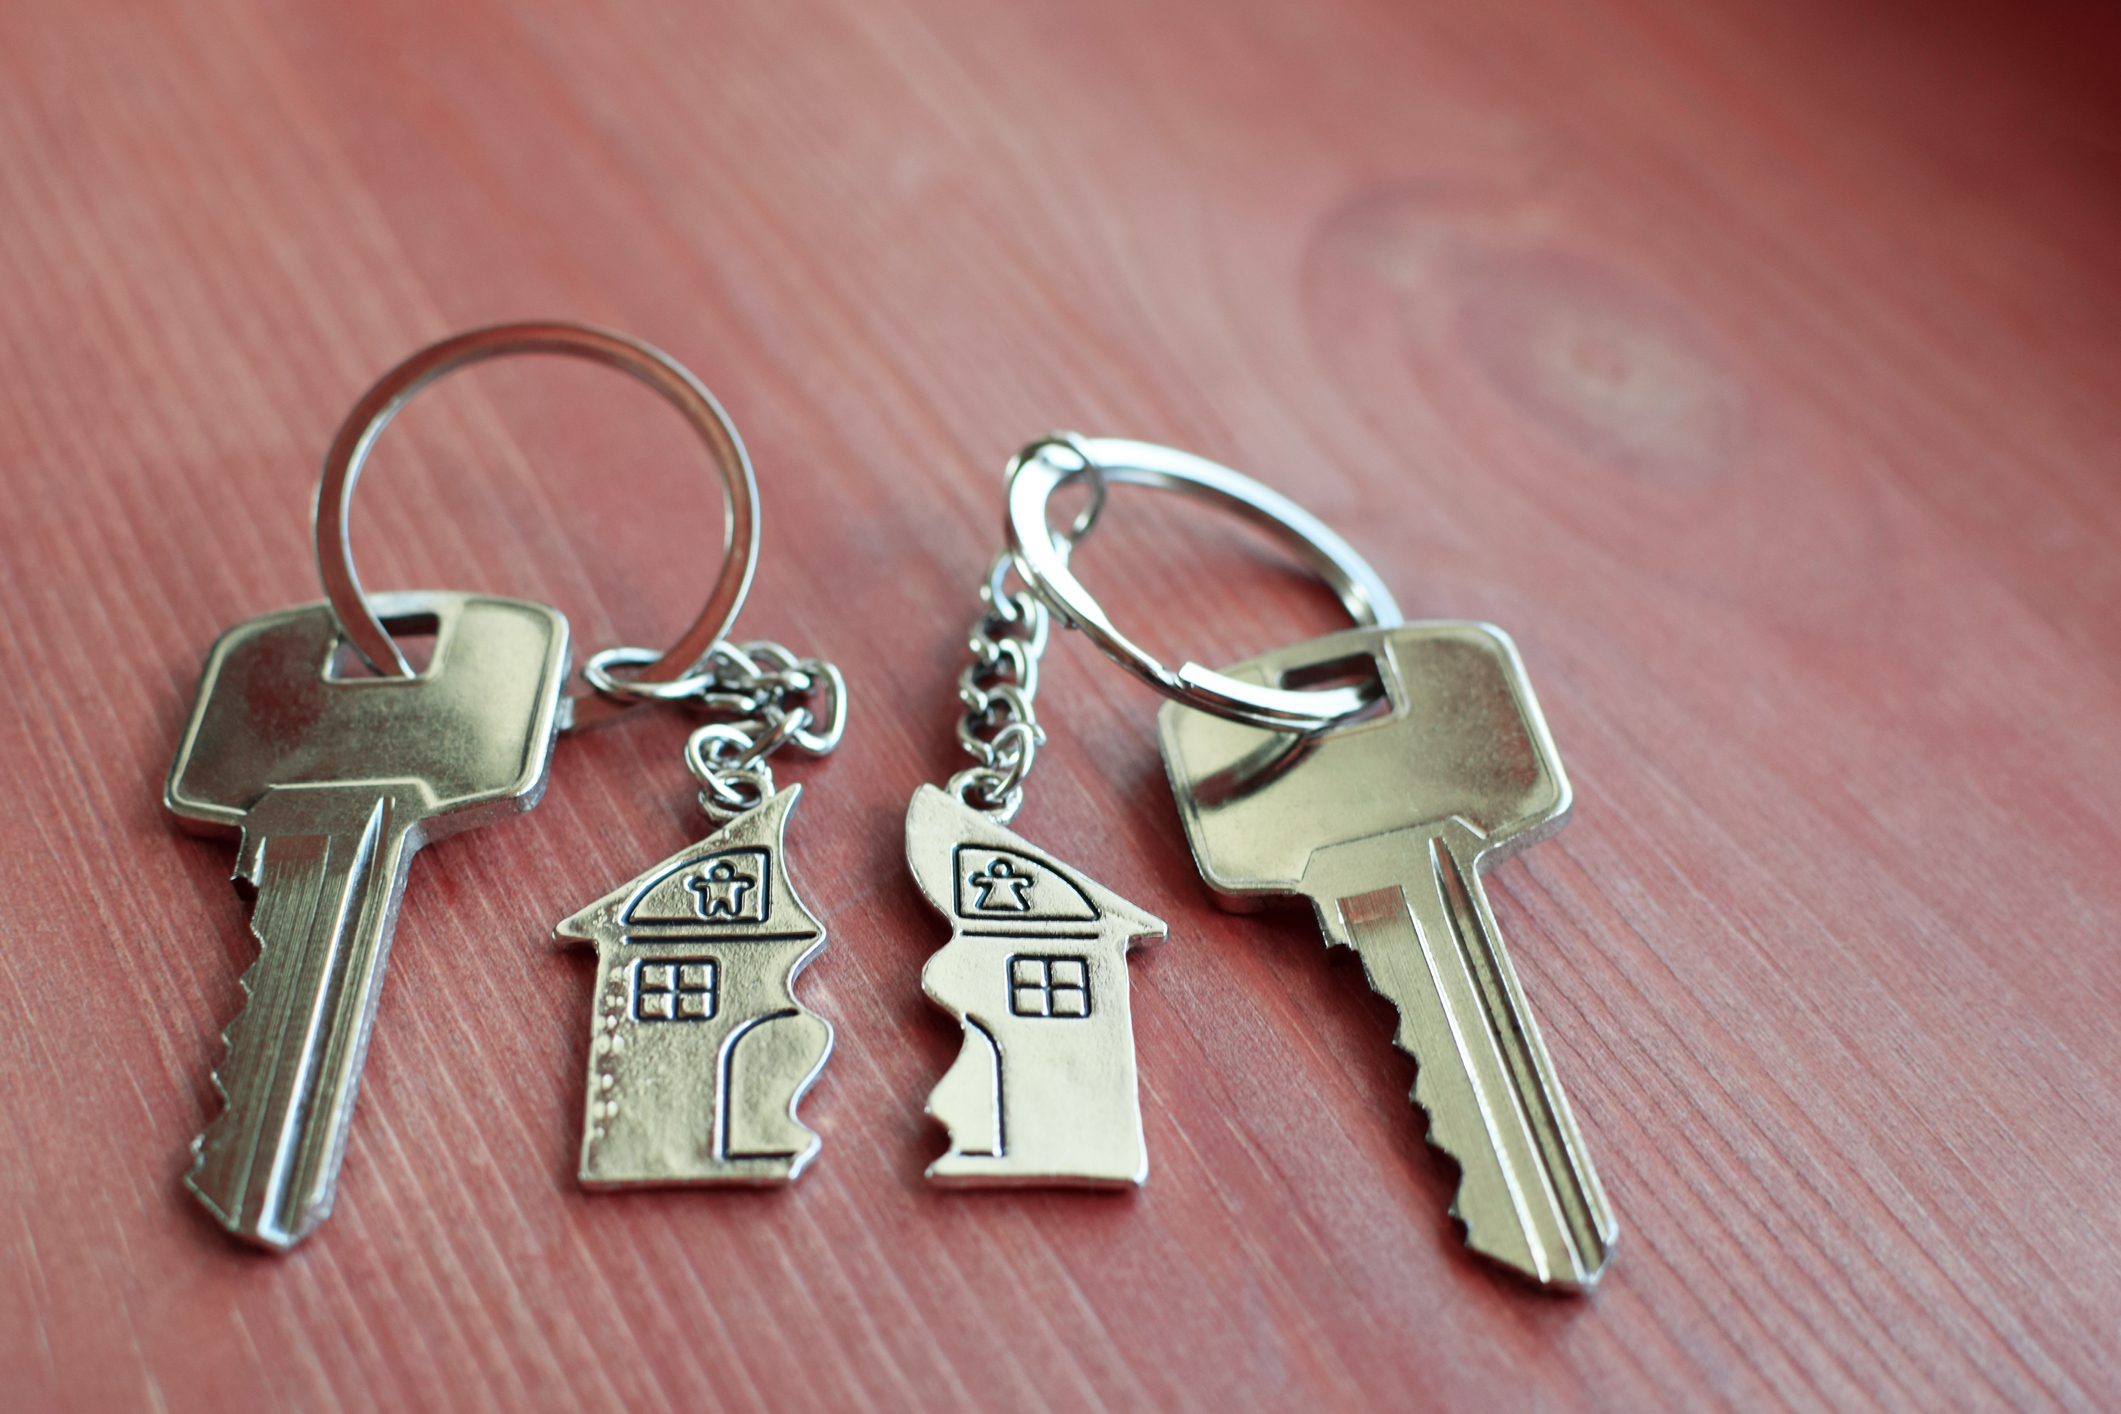 Two keychains with house-shaped pendants and keys on a wooden surface, symbolizing cohabitation or shared living spaces